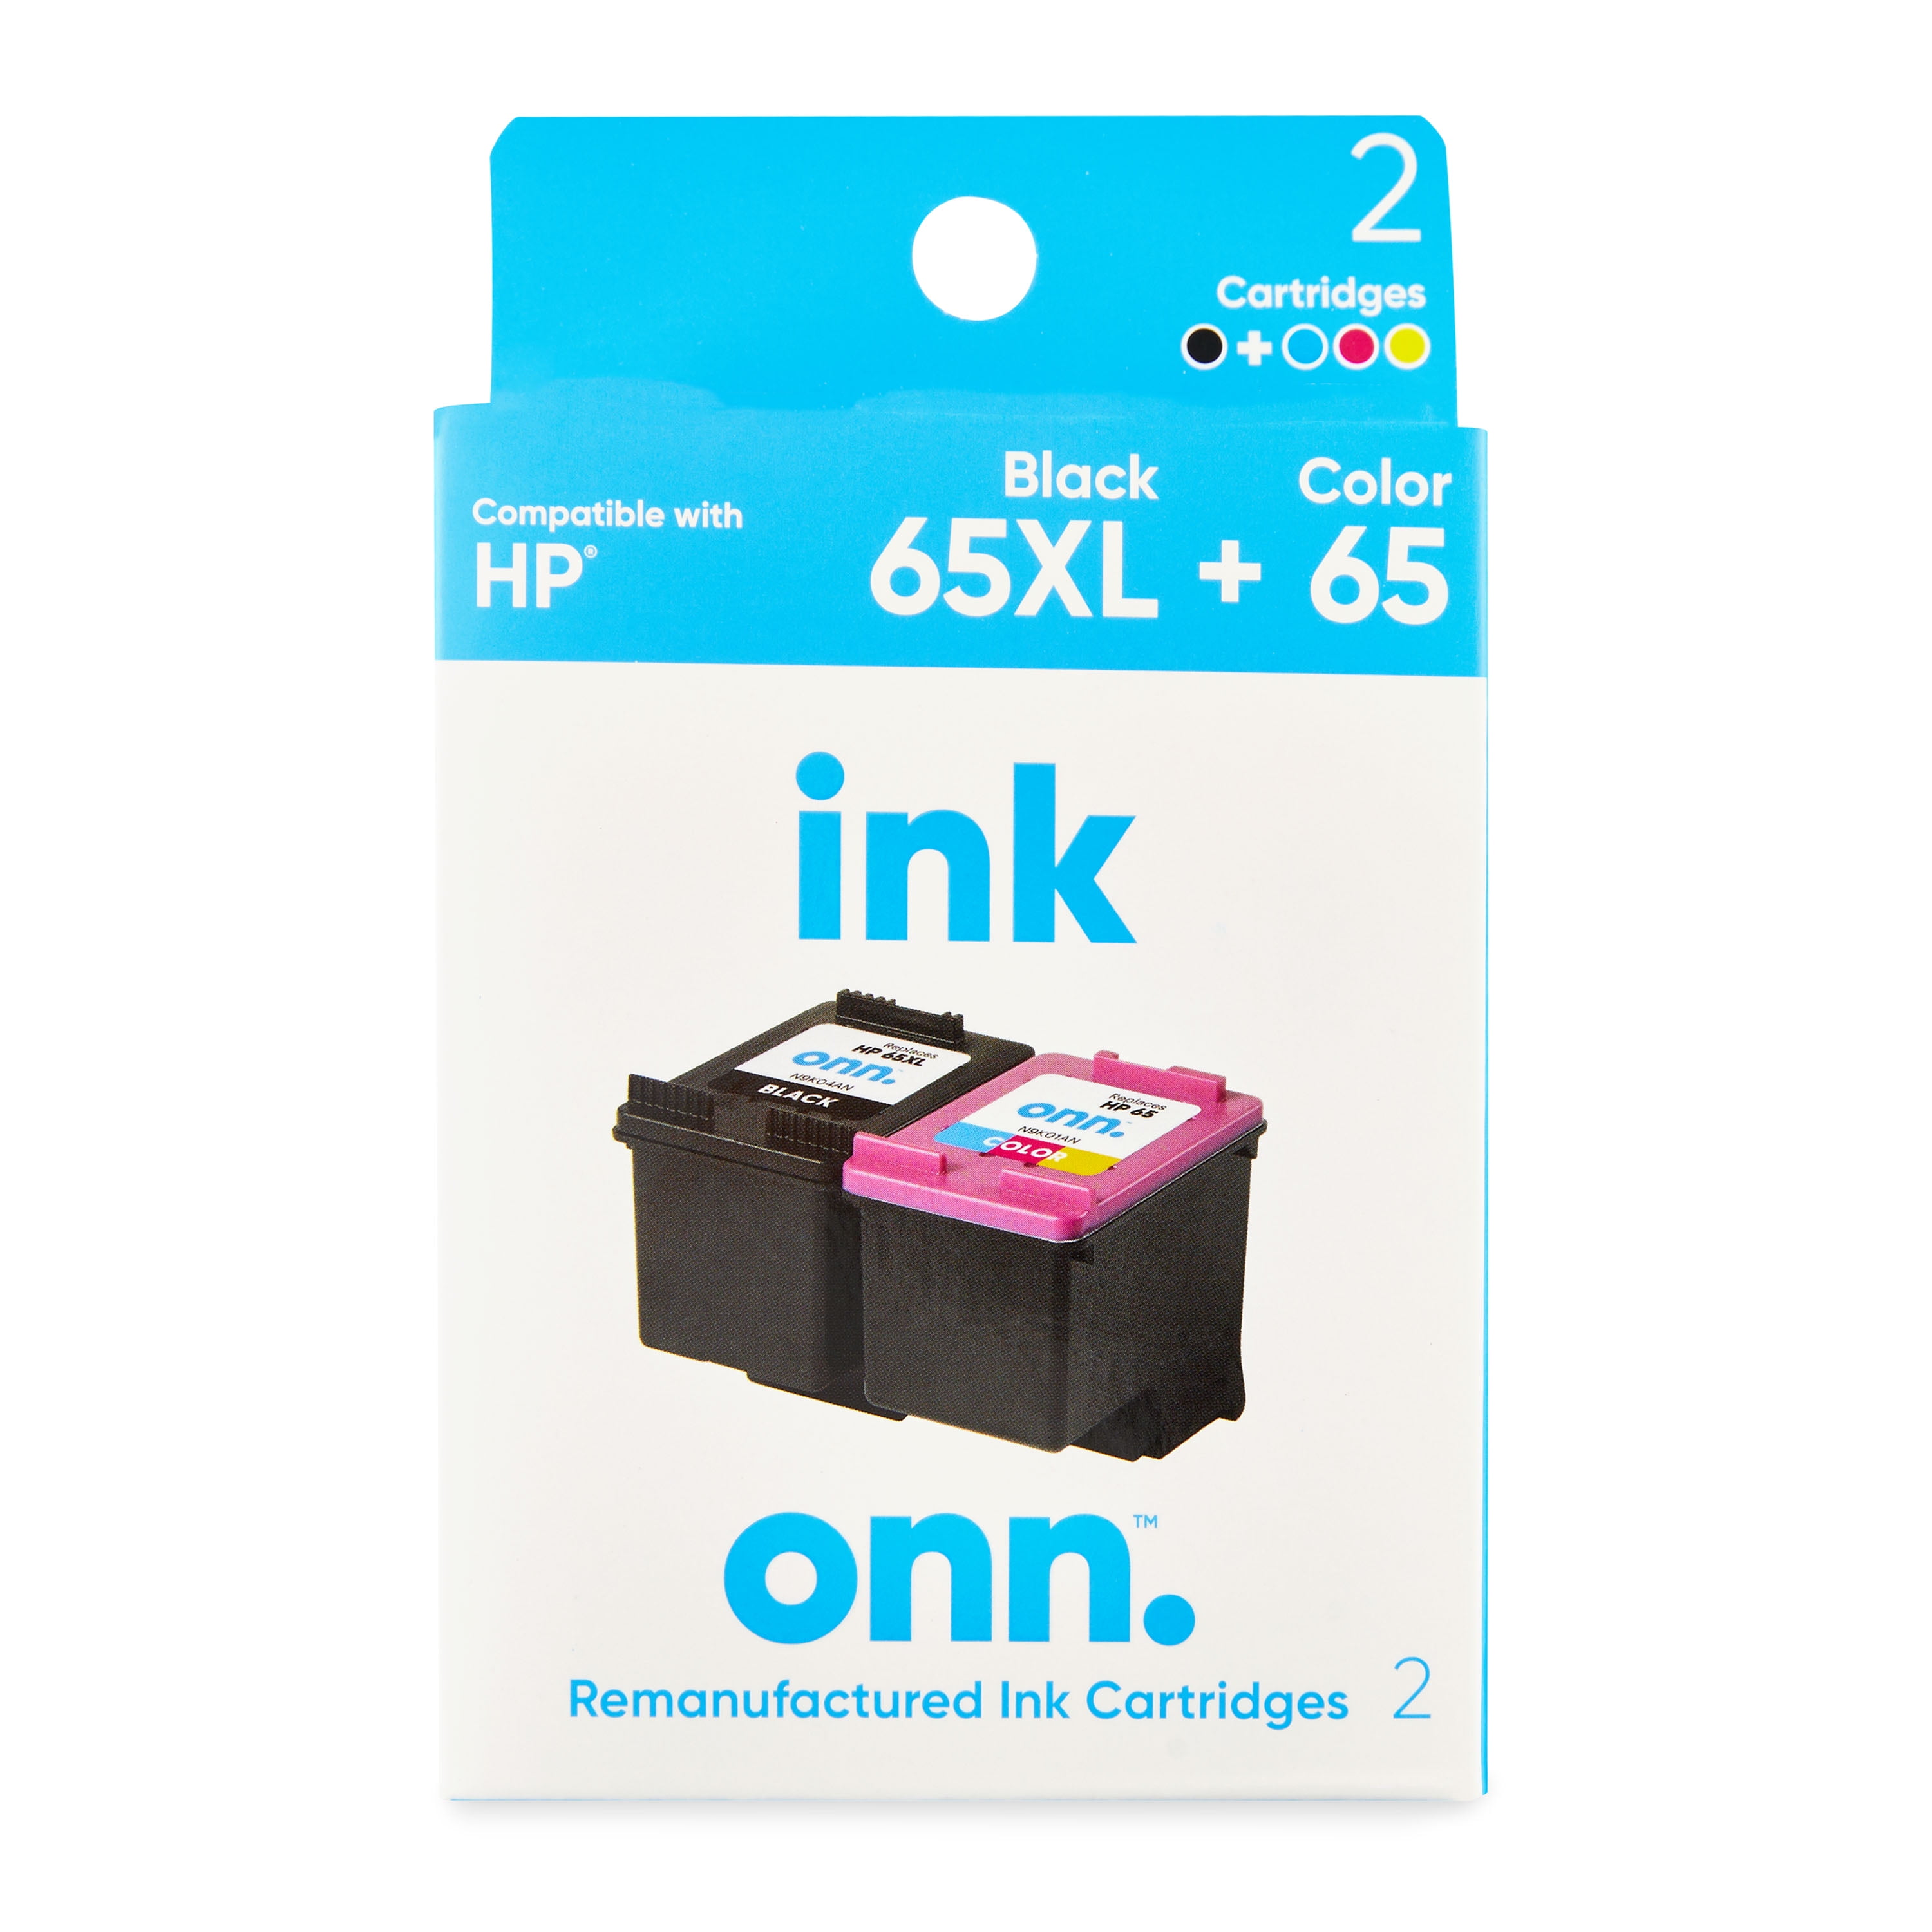 onn. Remanufactured Ink Cartridge, HP 65XL Black and 65 Tri-Color